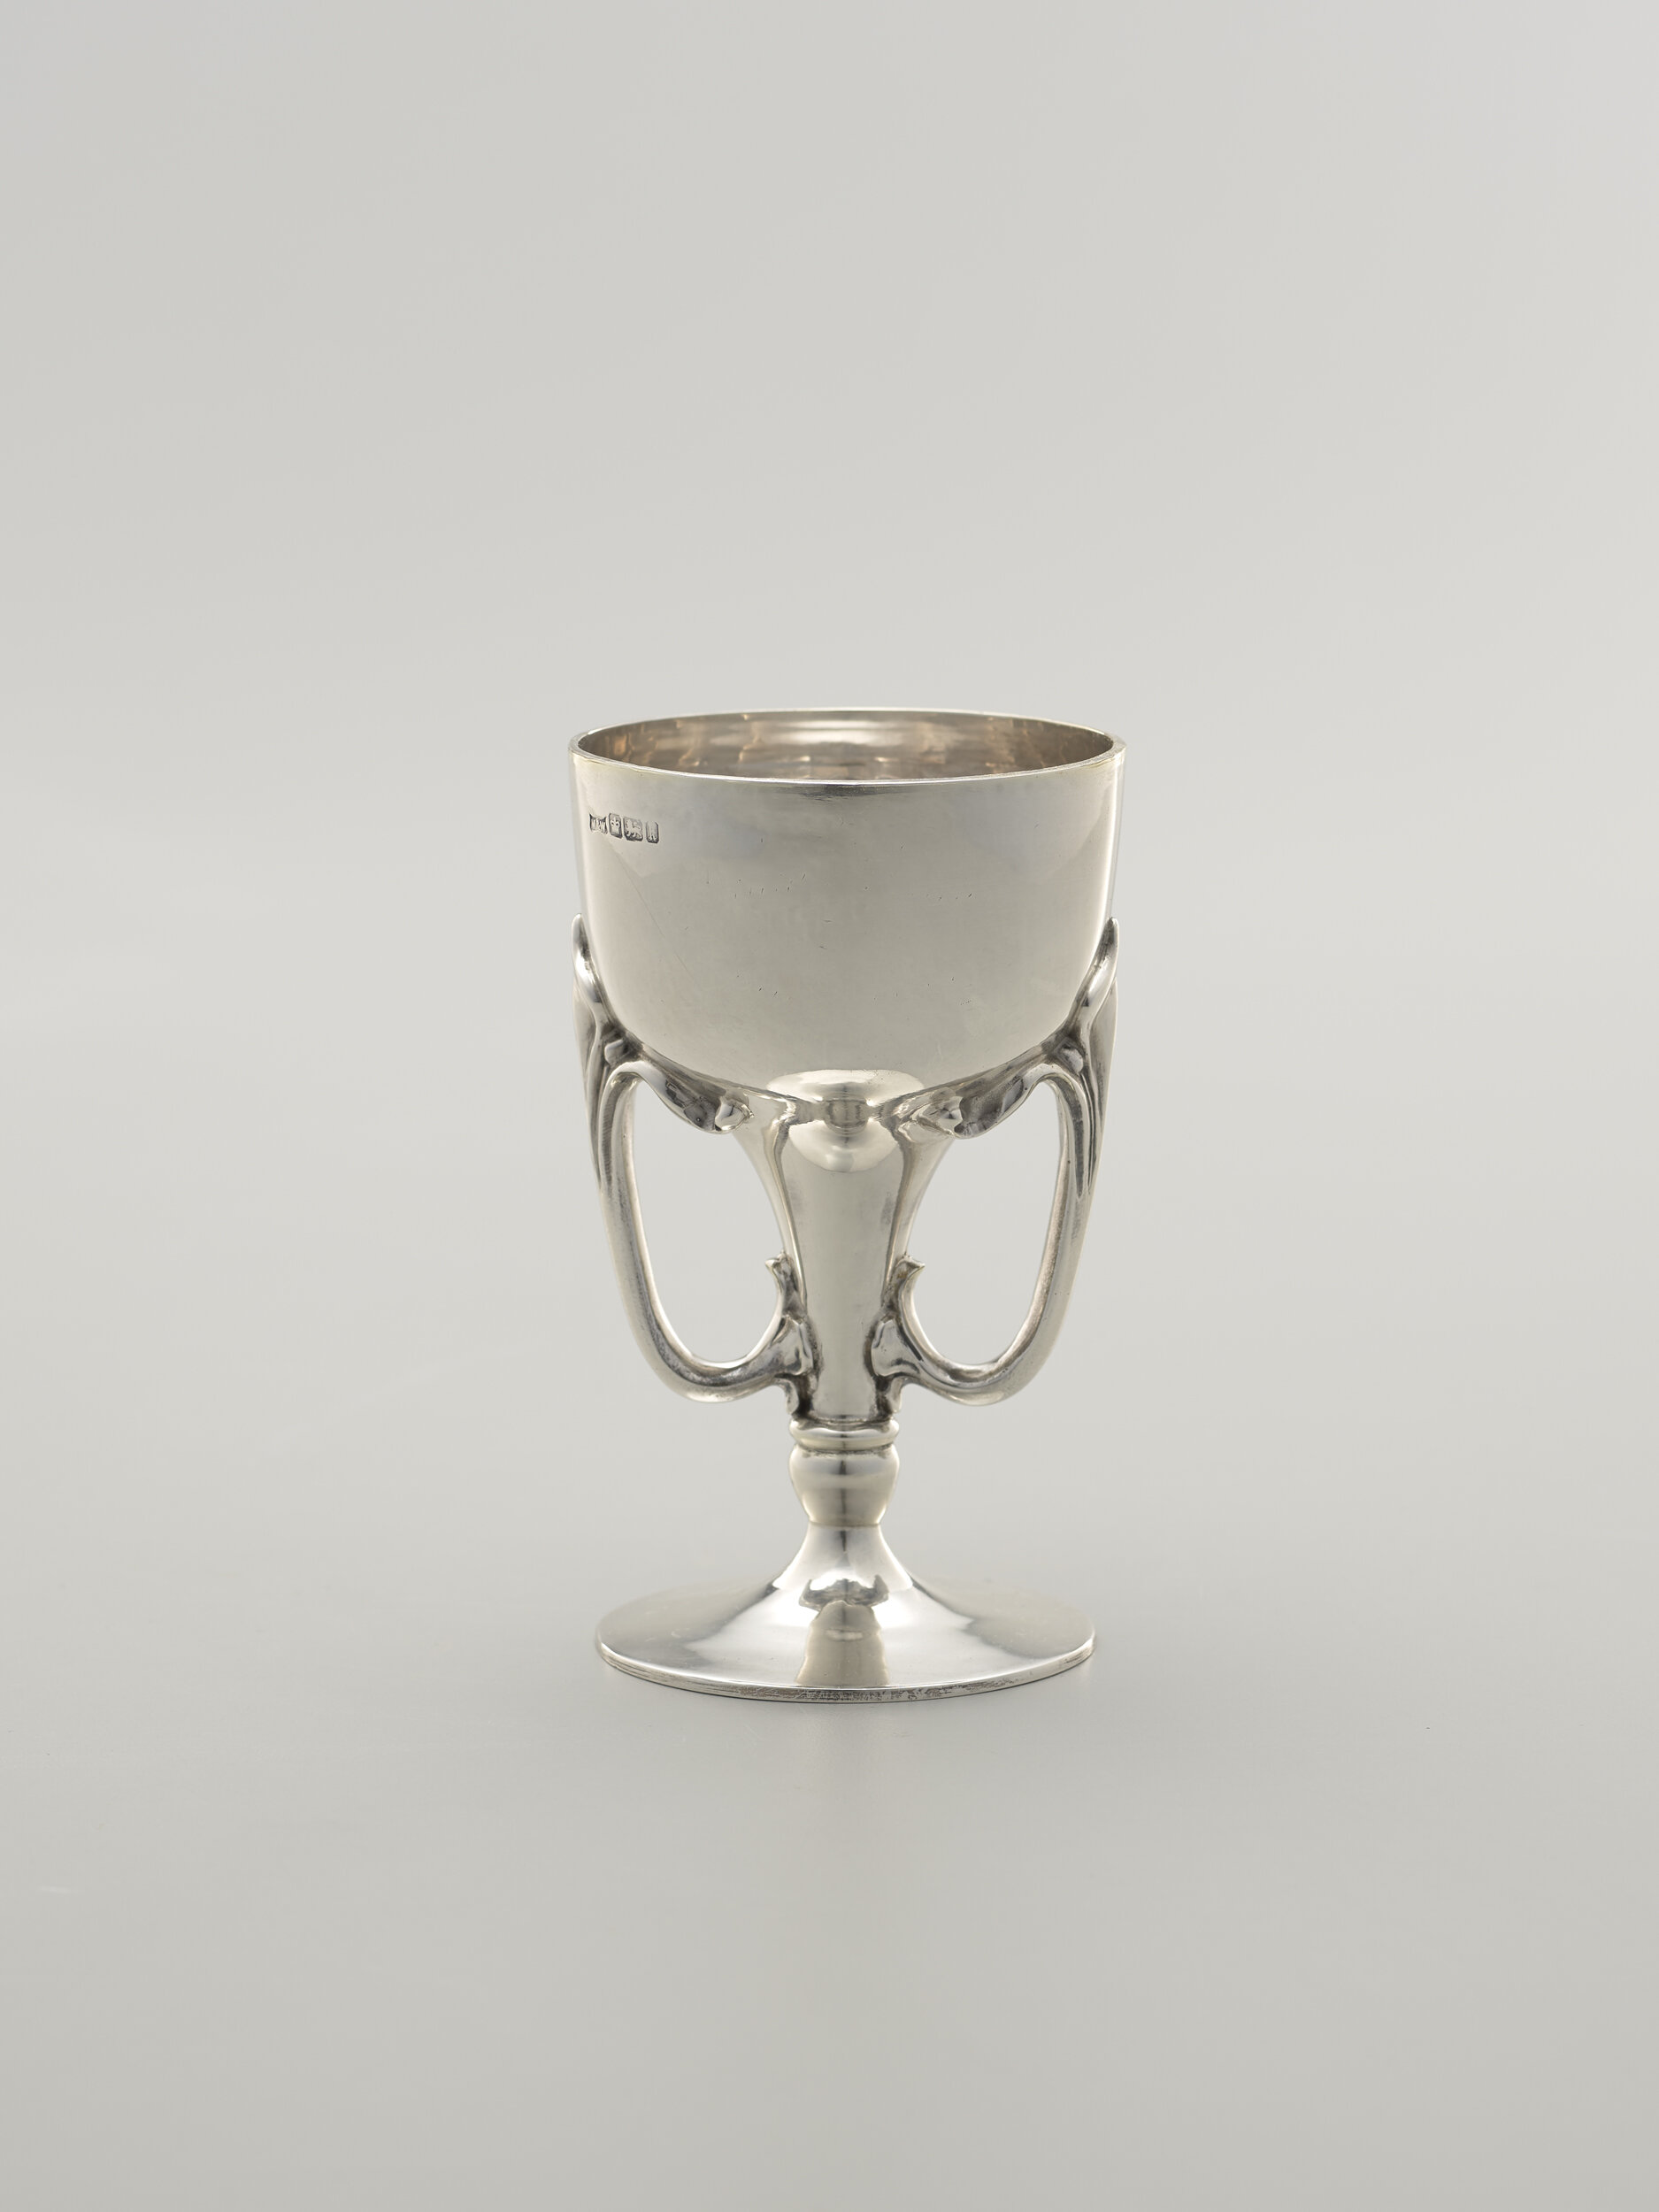  maker's mark of Mappin &amp; Webb Ltd., Chalice, 1902, sterling silver, The Margo Grant Walsh 20th Century Silver and Metalworks Collection, public domain, 2001.129.31 